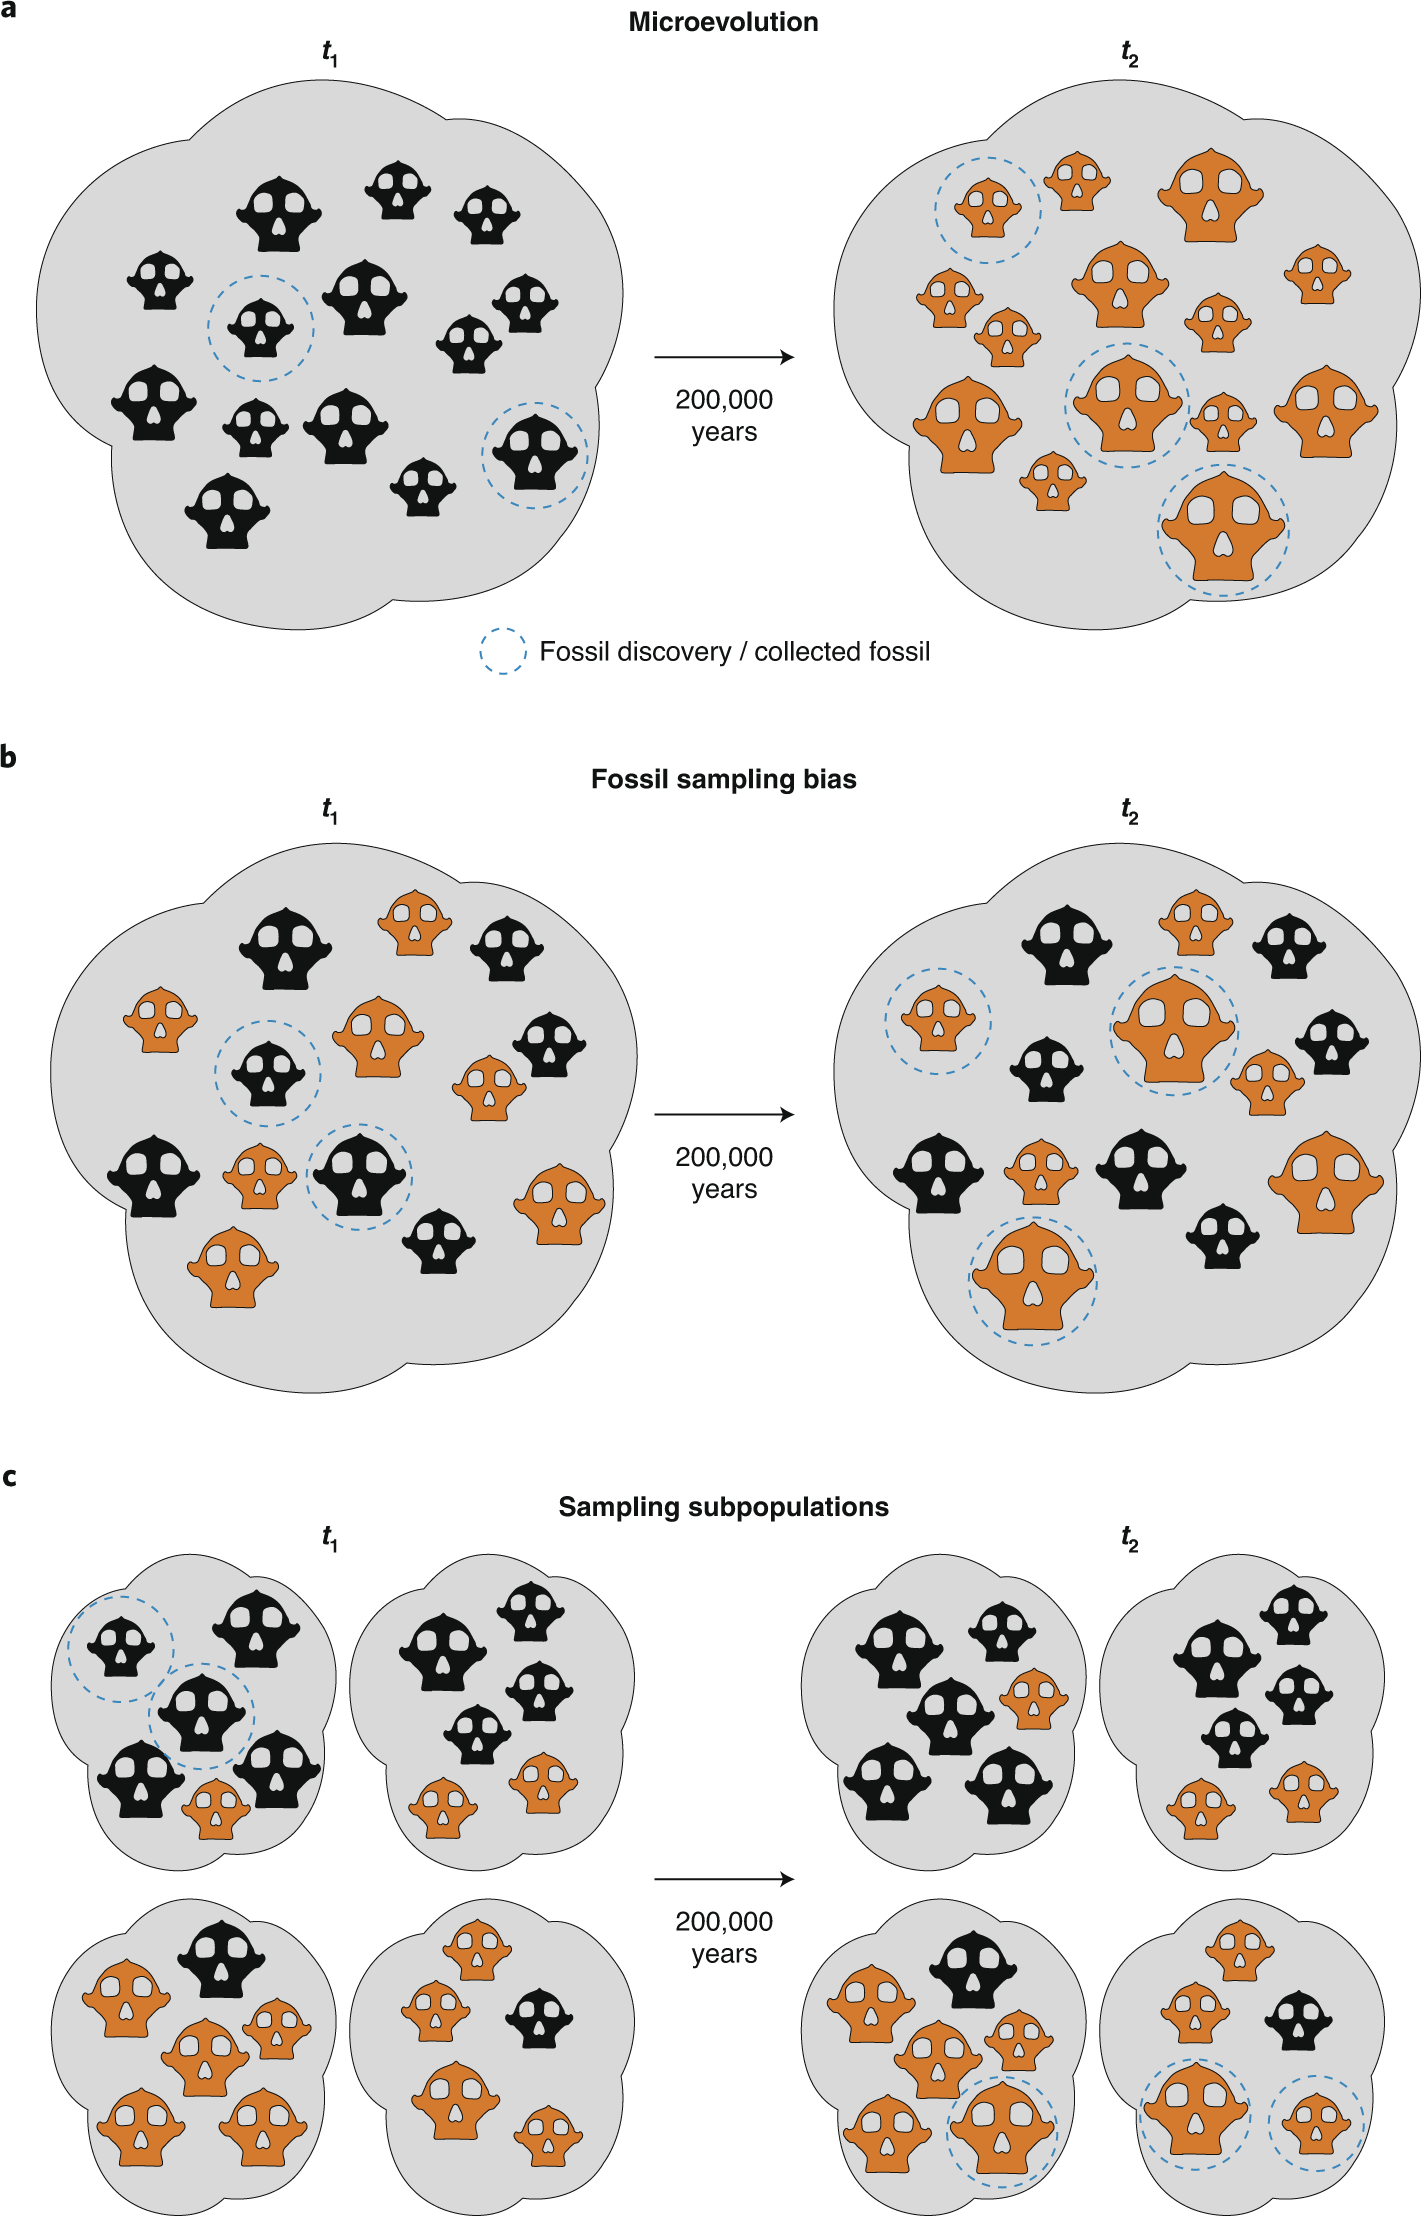 Microevolution in our megadont relative | Nature Ecology & Evolution